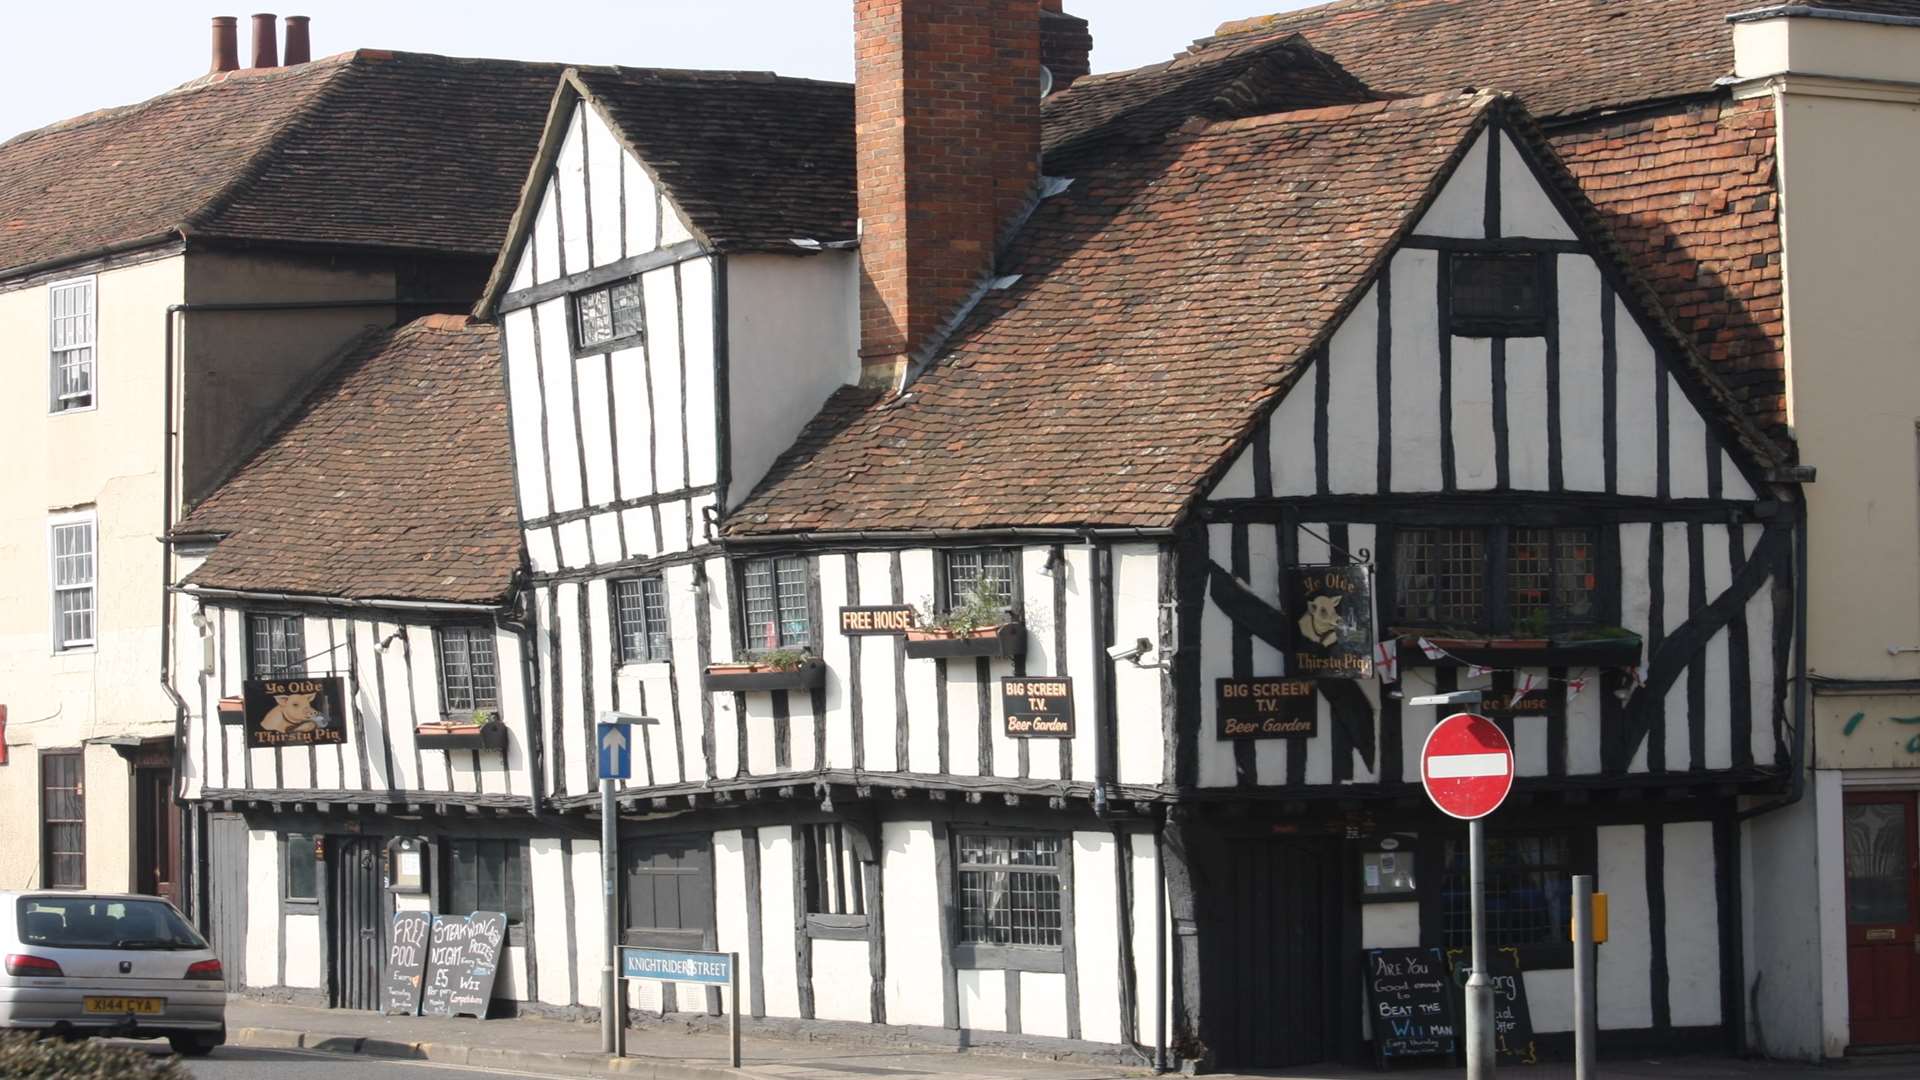 Ye Olde Thirsty Pig is on the corner of Knightrider Street and Lower Stone Street in Maidstone